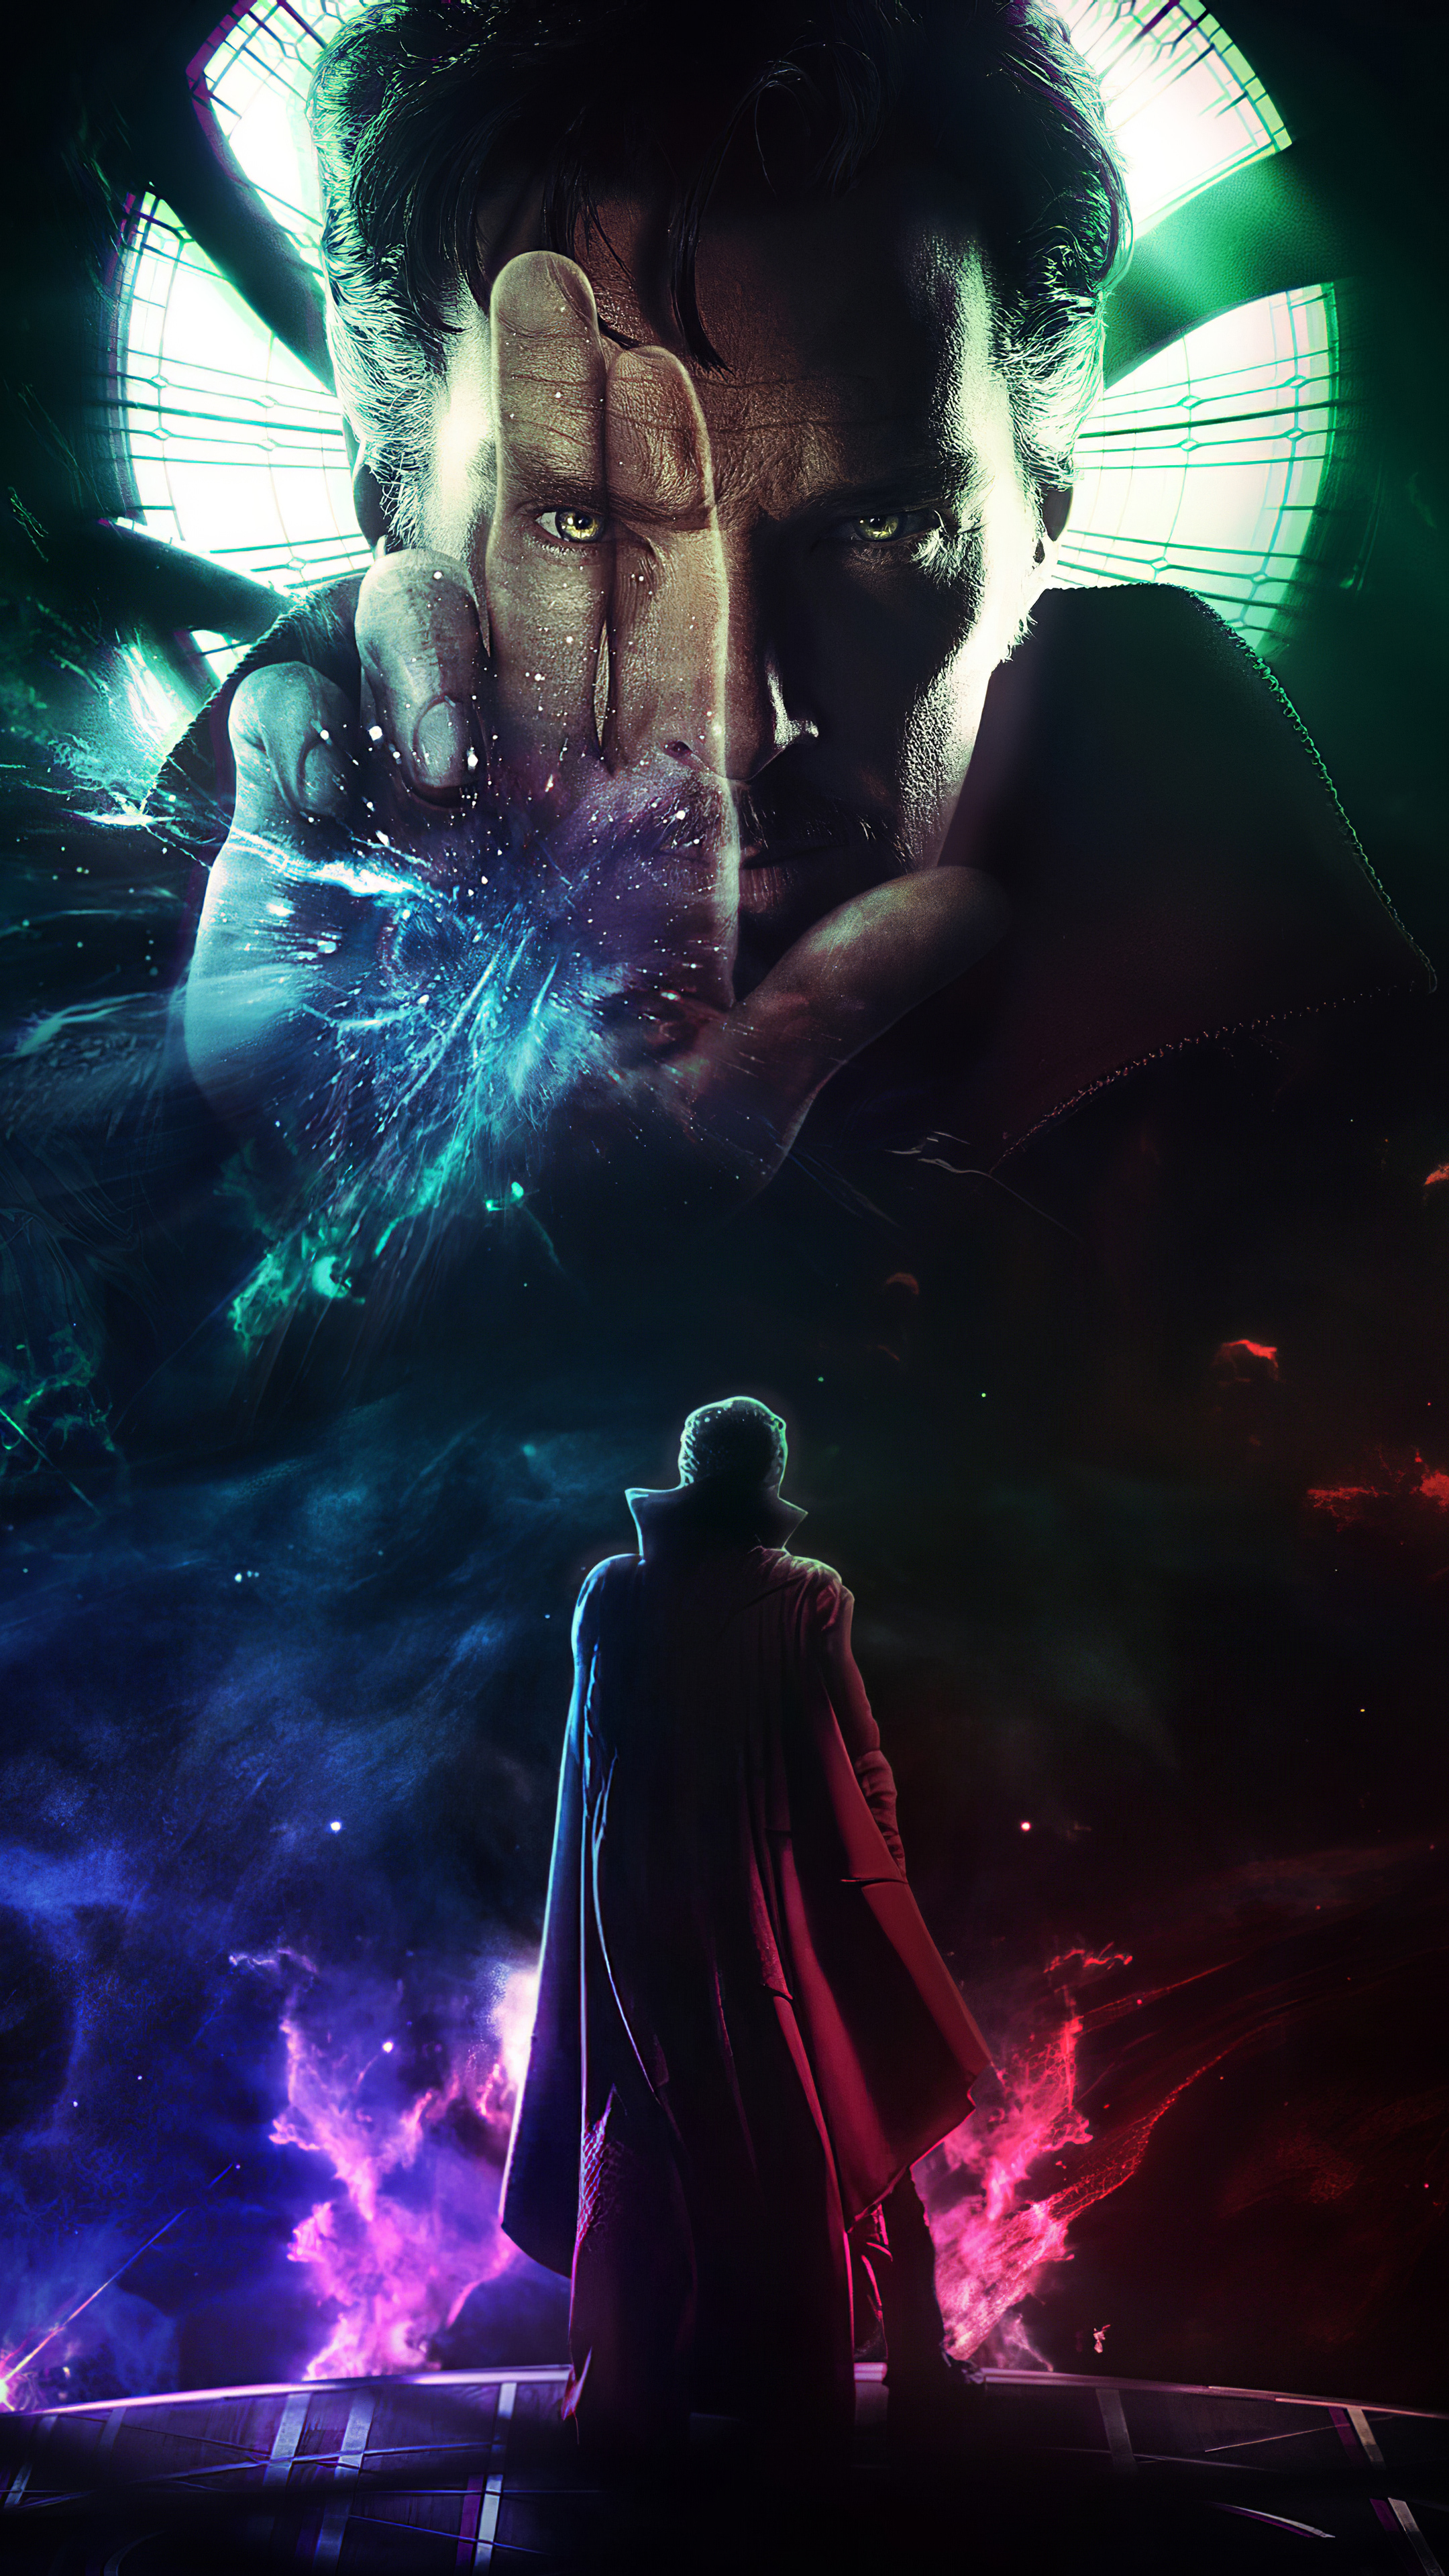 2160x3840 Doctor Strange In The Multiverse Of Madness 4k Artwork Sony Xperia X,XZ,Z5 Premium HD 4k Wallpapers, Image, Backgrounds, Photos and Pictures